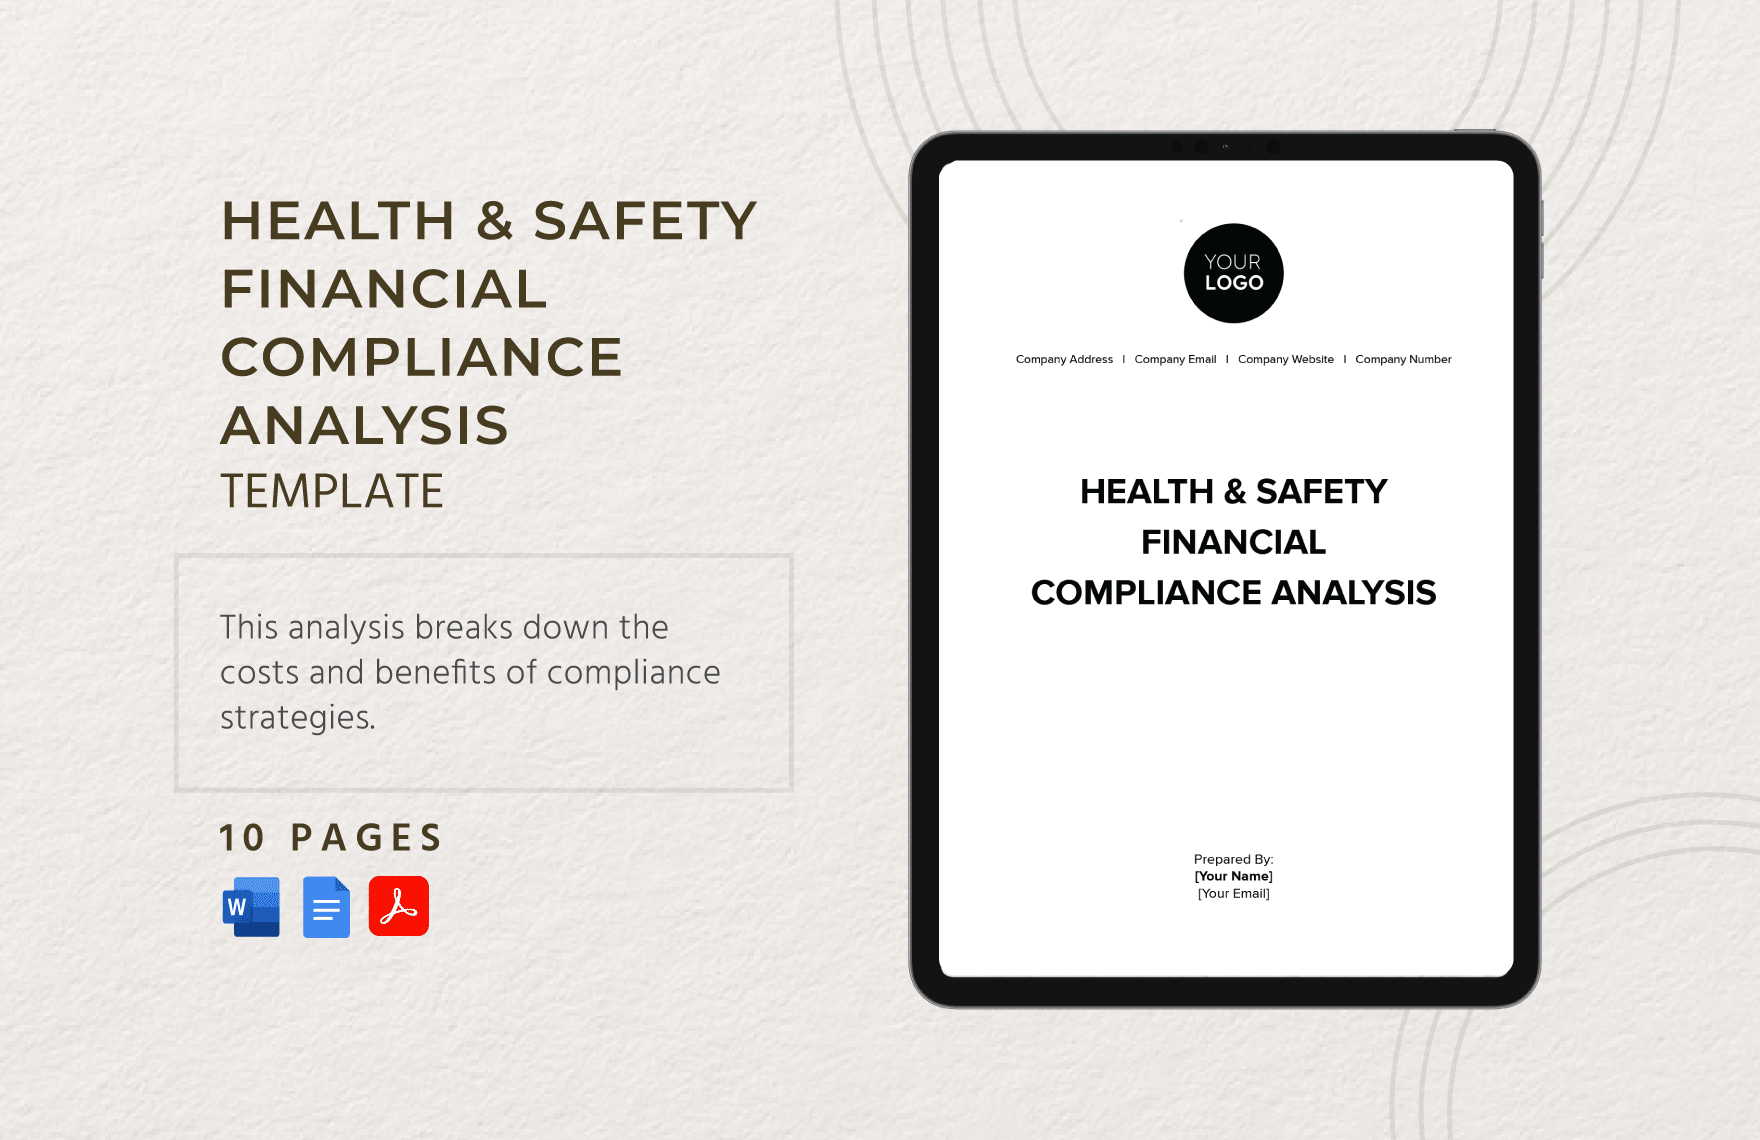 Health & Safety Financial Compliance Analysis Template